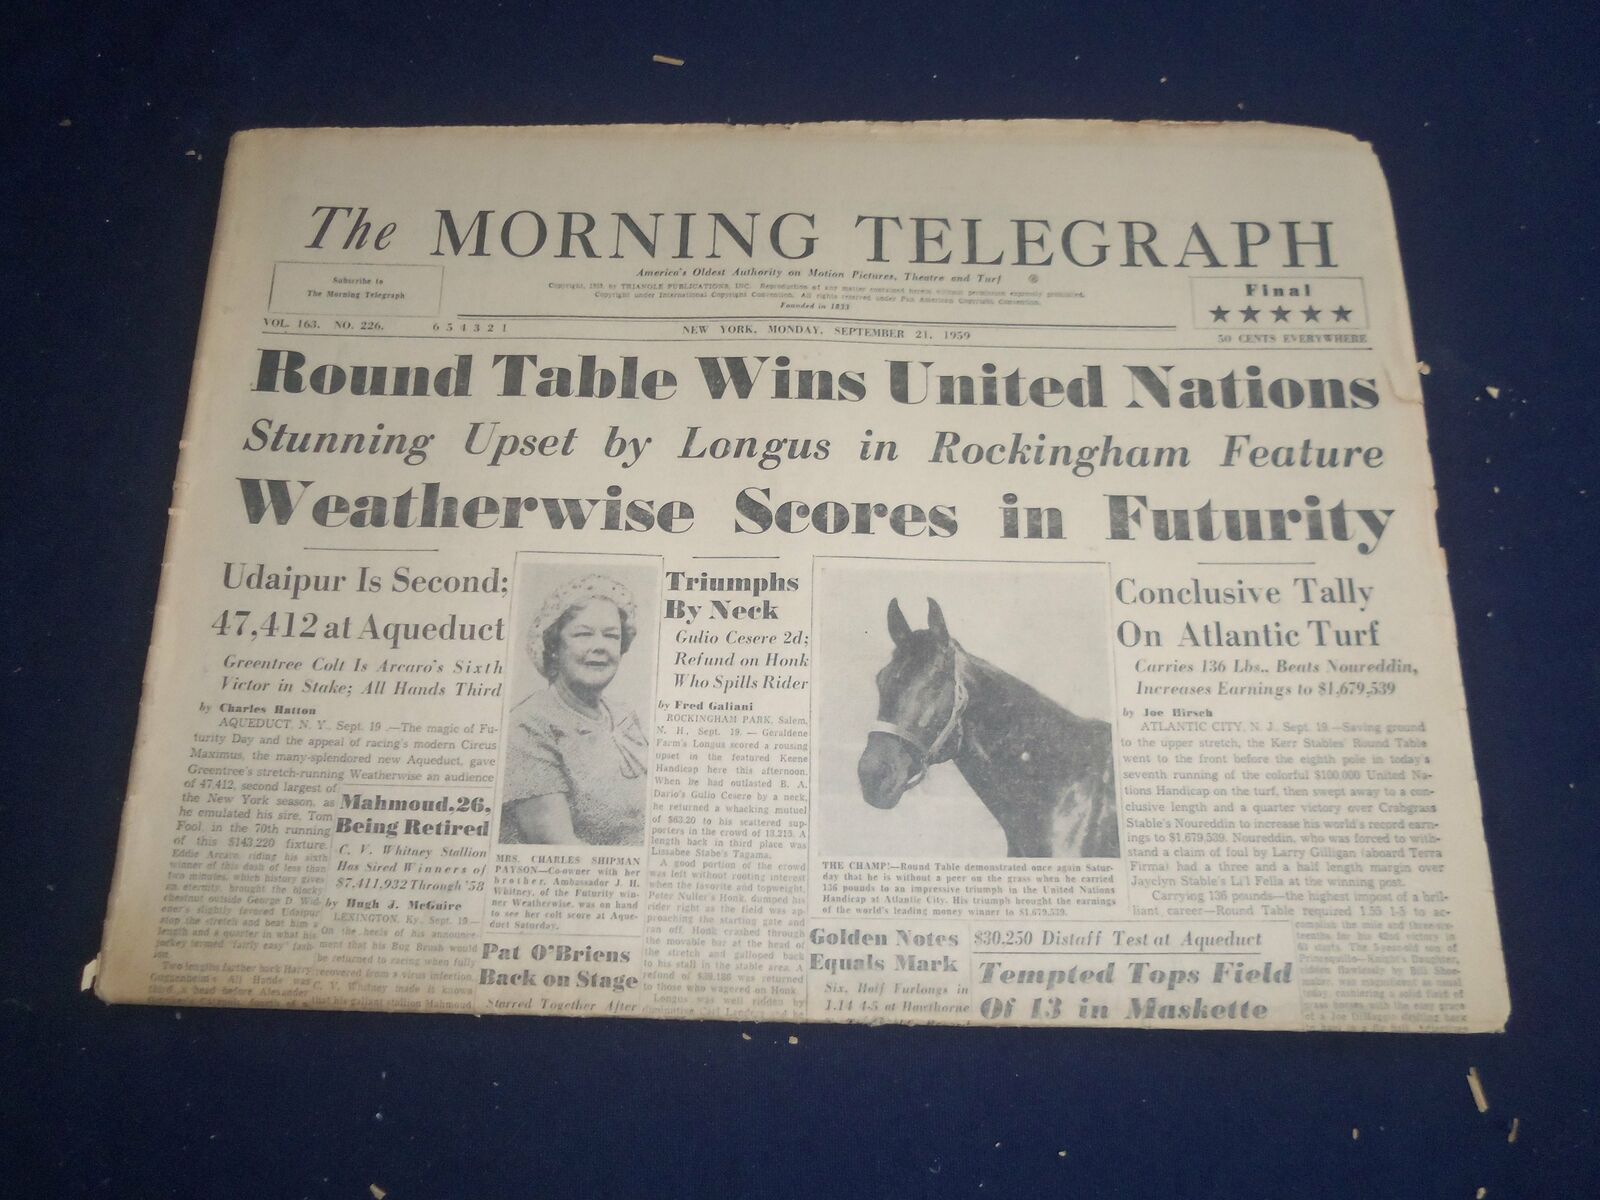 1959 SEP 21 THE MORNING TELEGRAPH - ROUND TABLE WINS UNITED NATIONS - NP 5538